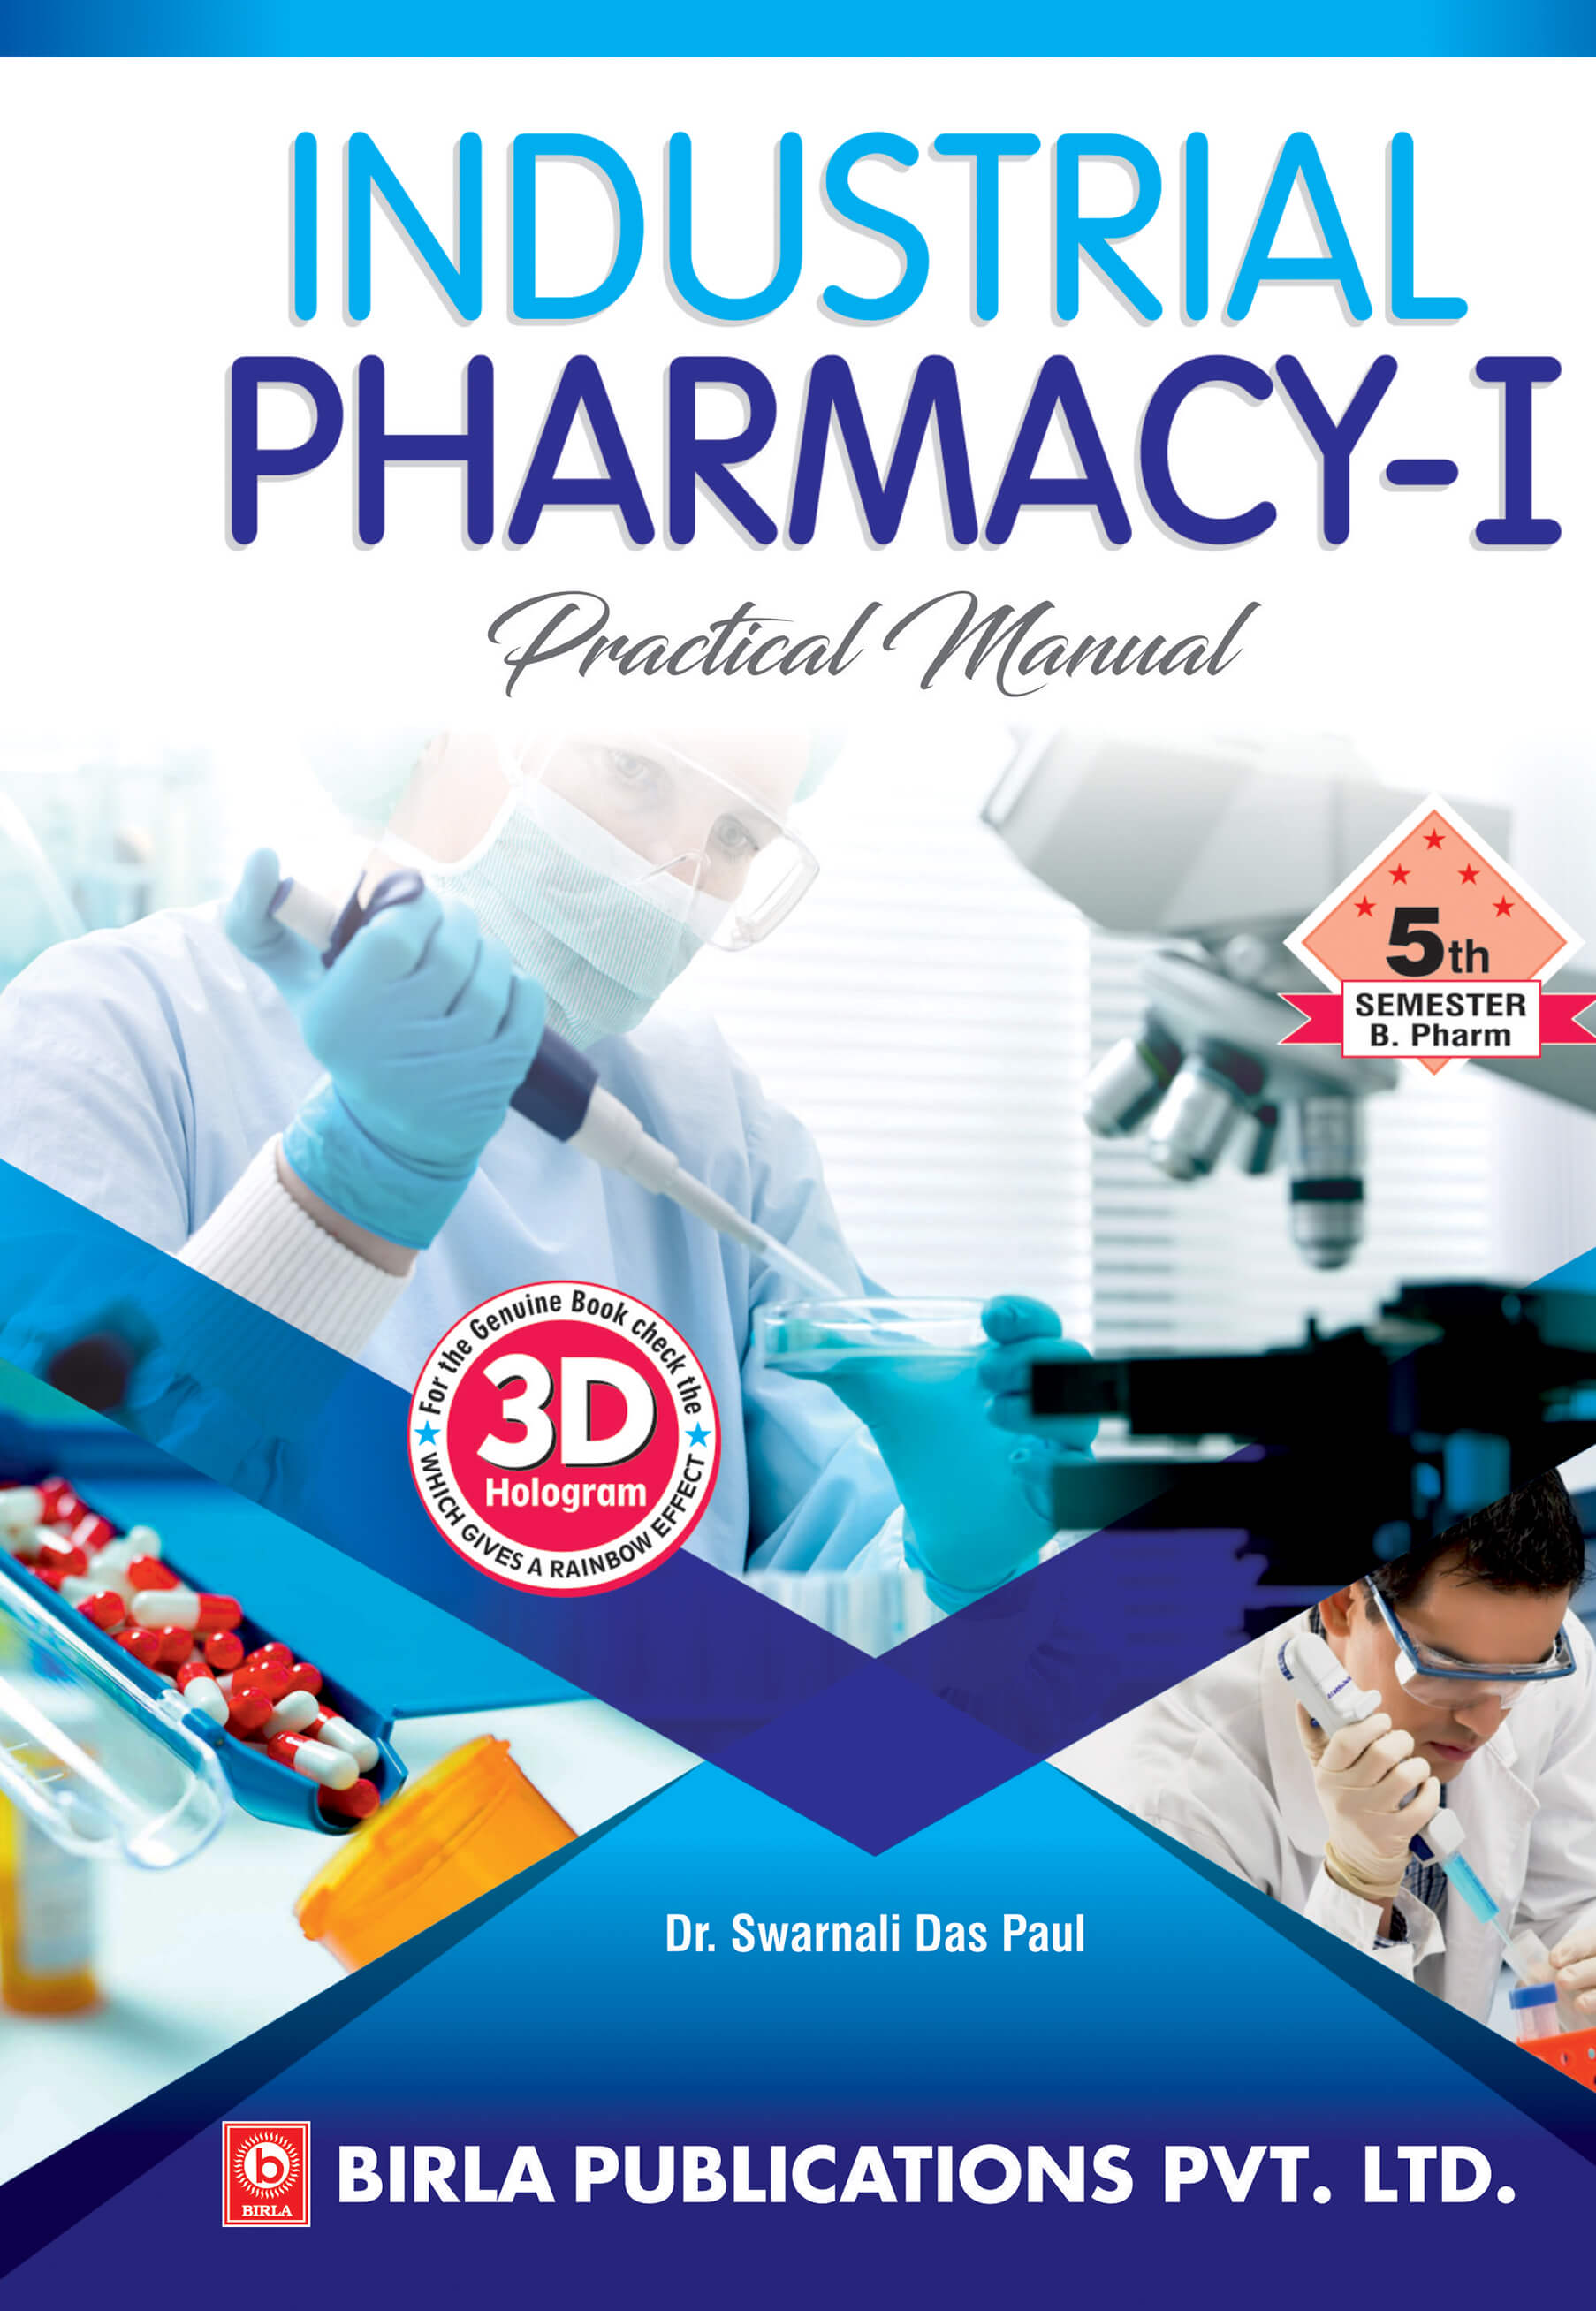 A TEXT BOOK OF INDUSTRIAL PHARMACY-I